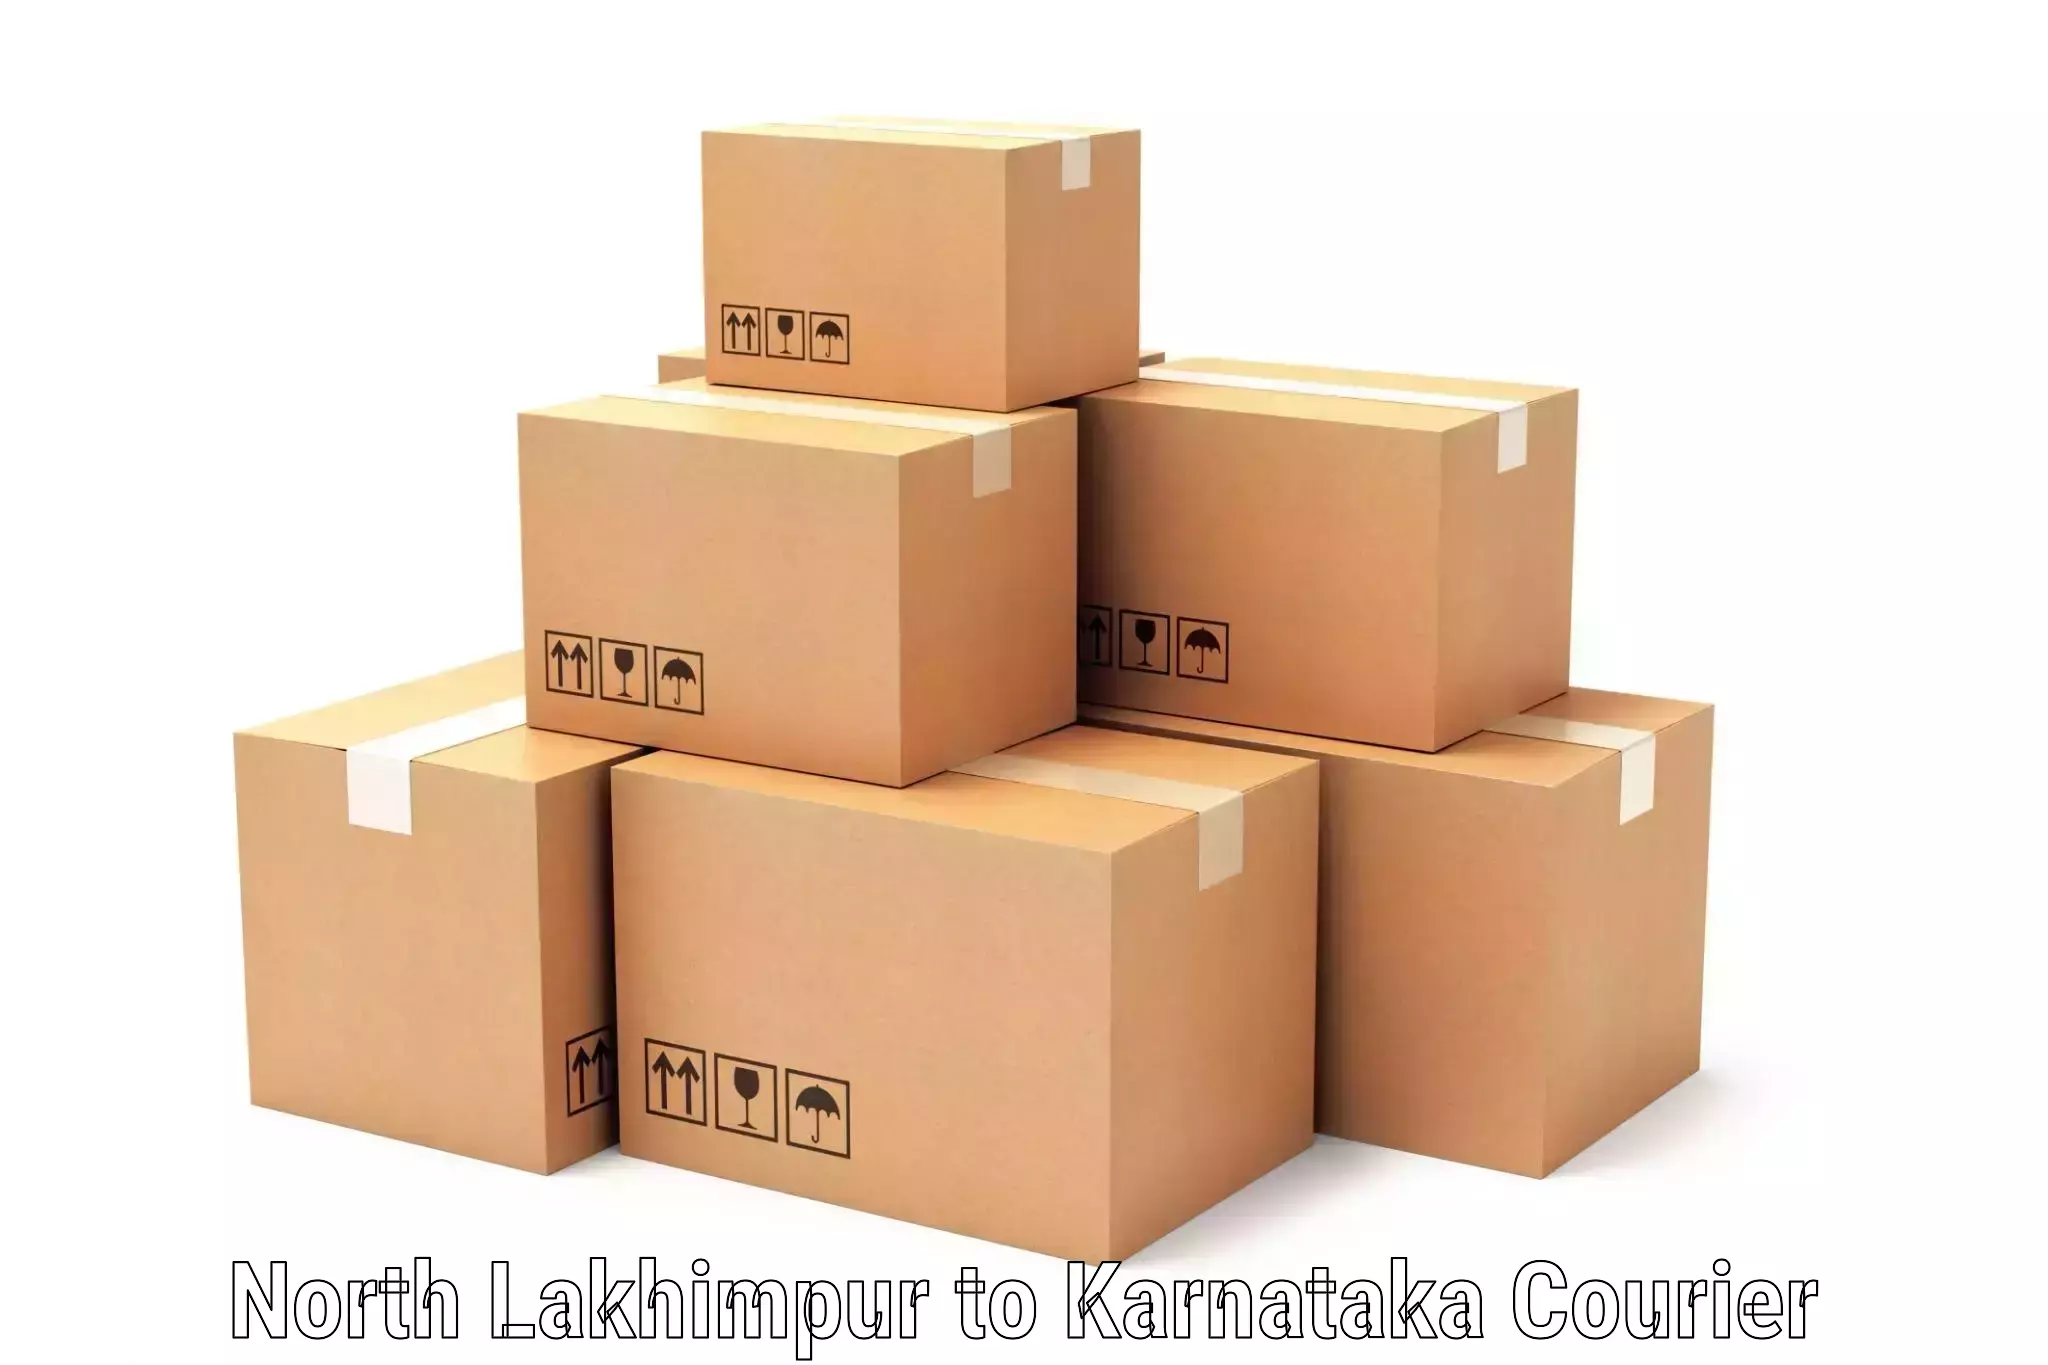 Flexible delivery scheduling North Lakhimpur to Ramanathapura